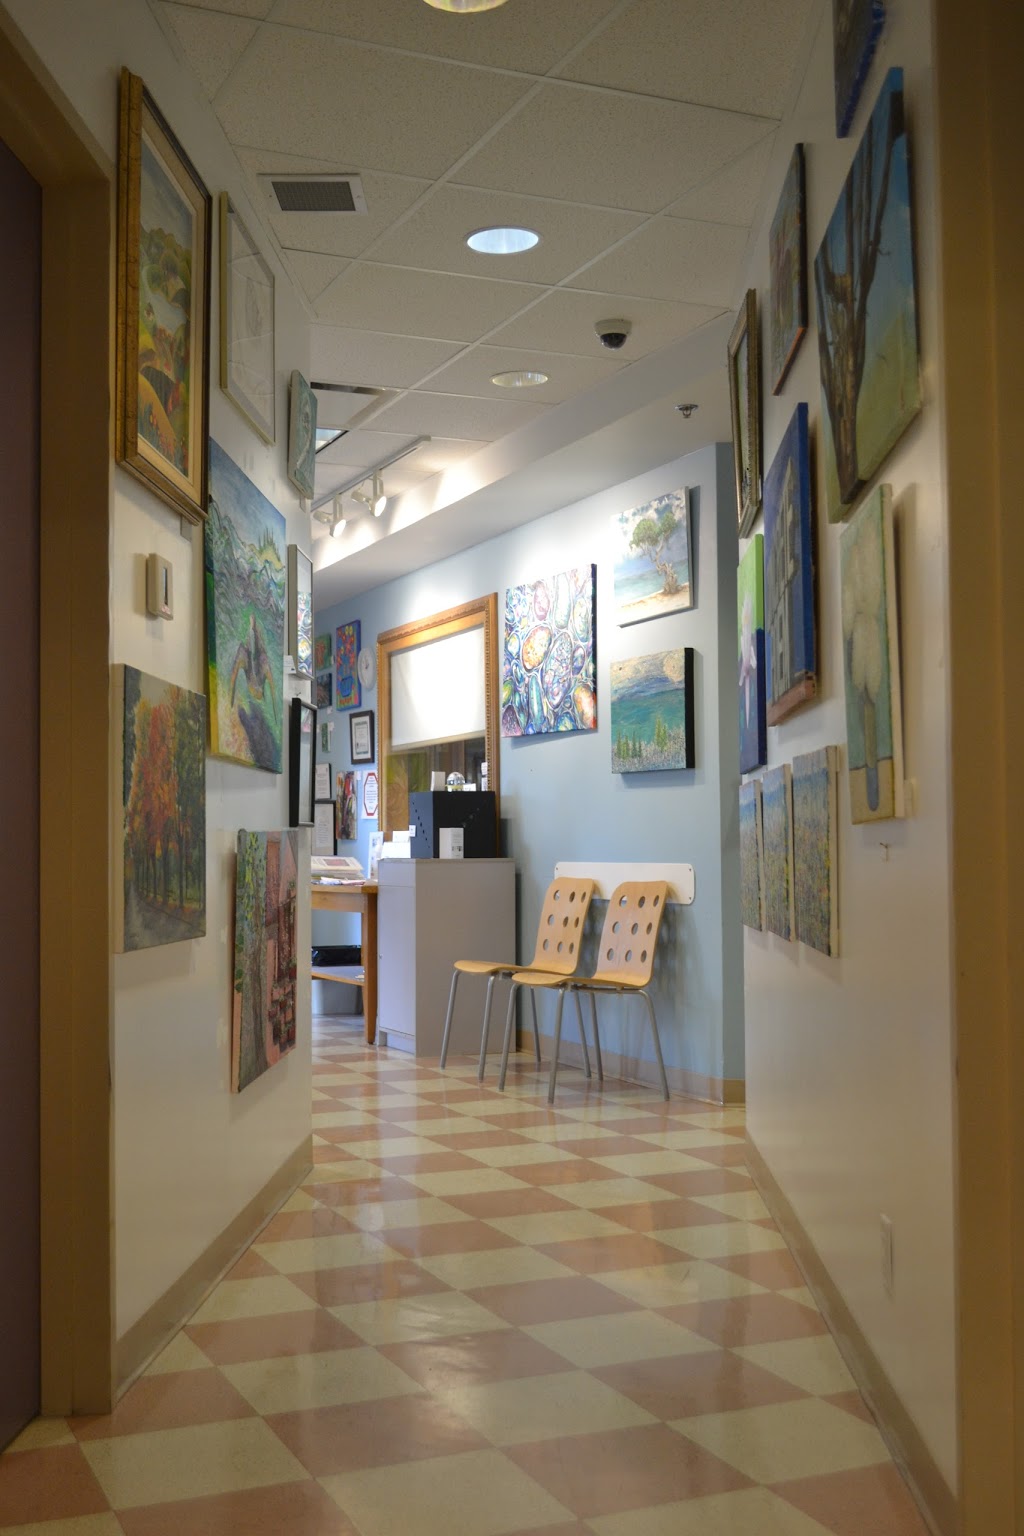 The Art Studios | 2005 E 44th Ave, Vancouver, BC V5P 1N1, Canada | Phone: (604) 871-9788